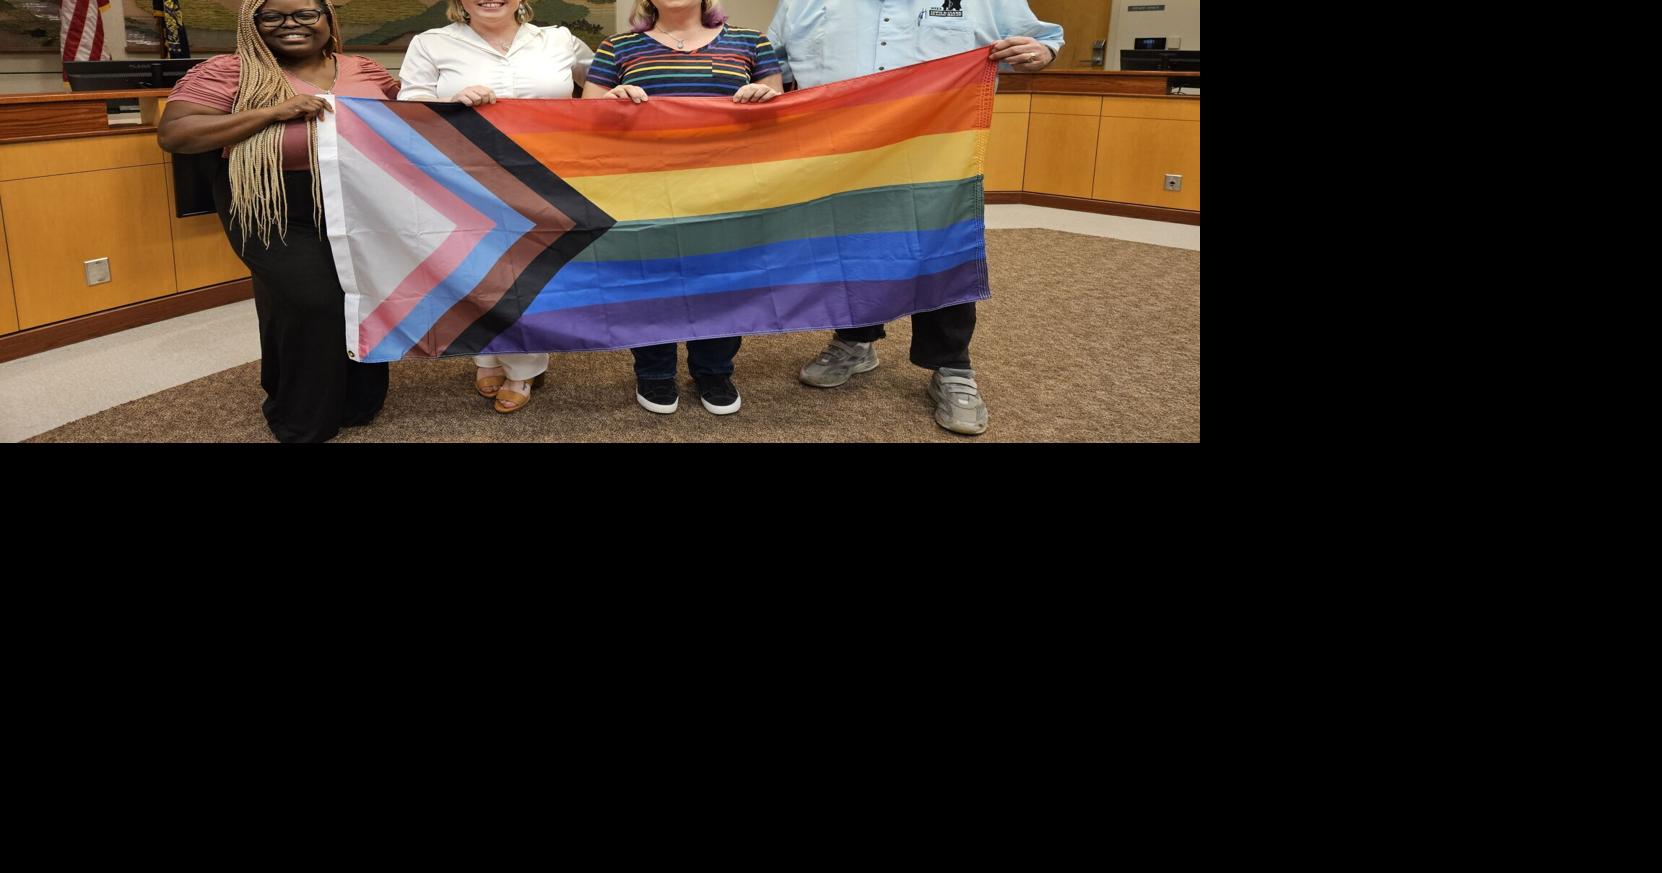 Albany Pride flag may not fly high at City Hall after all